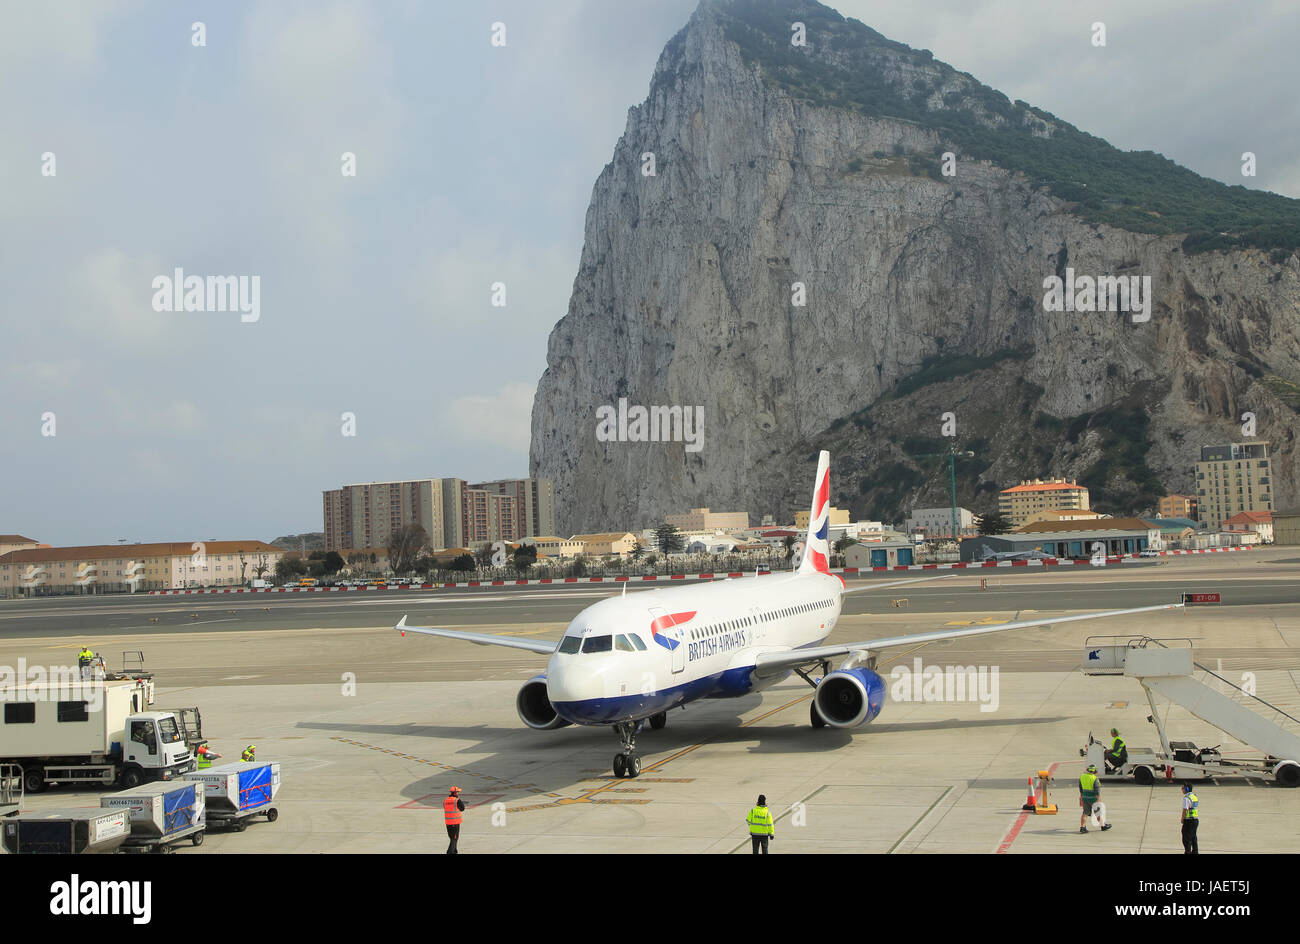 British airways plane International airport with the Rock in background, Gibraltar, southern Europe Stock Photo